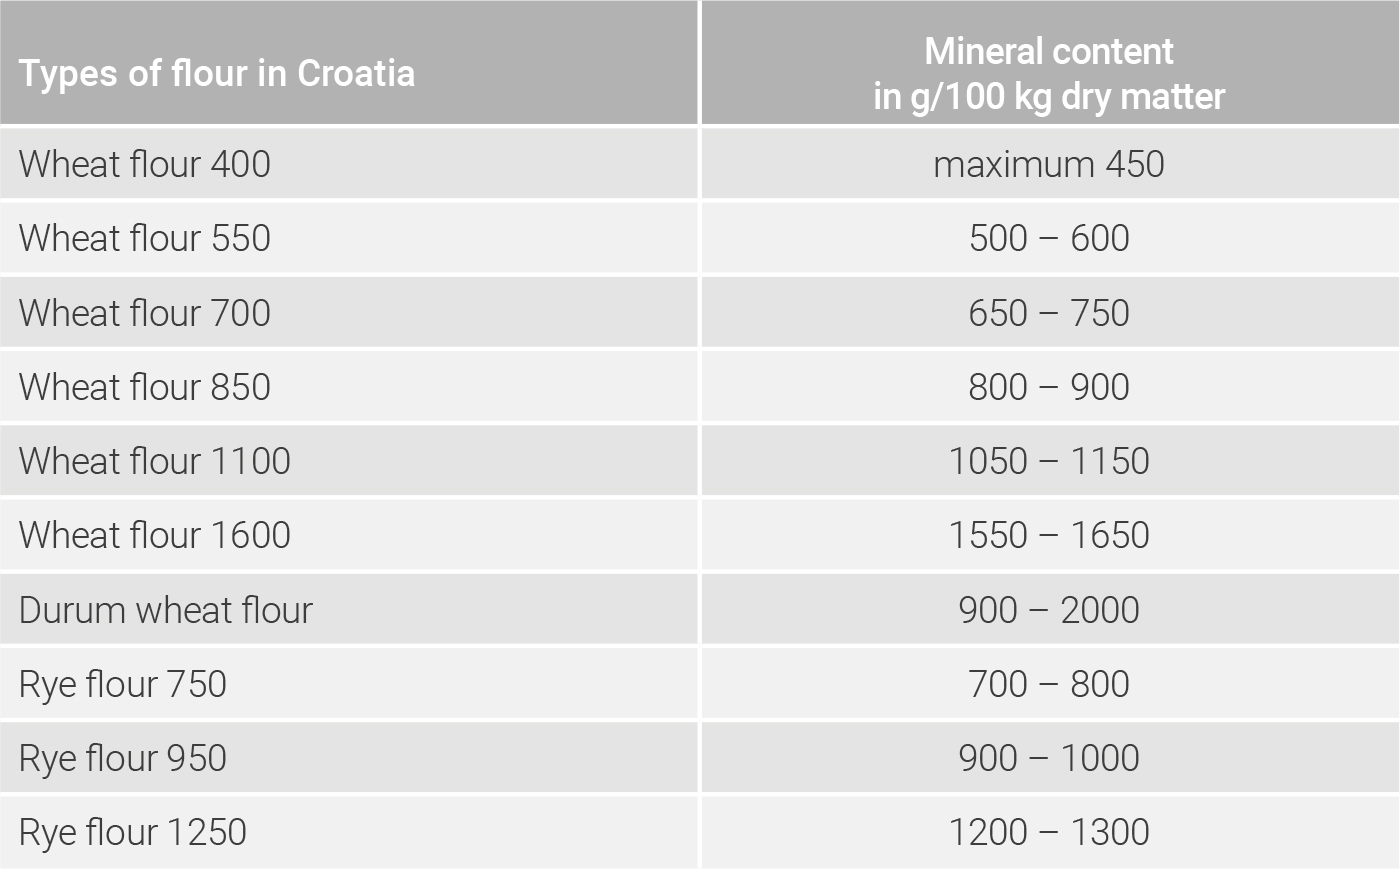 Mineral content of various ground products in Croatia